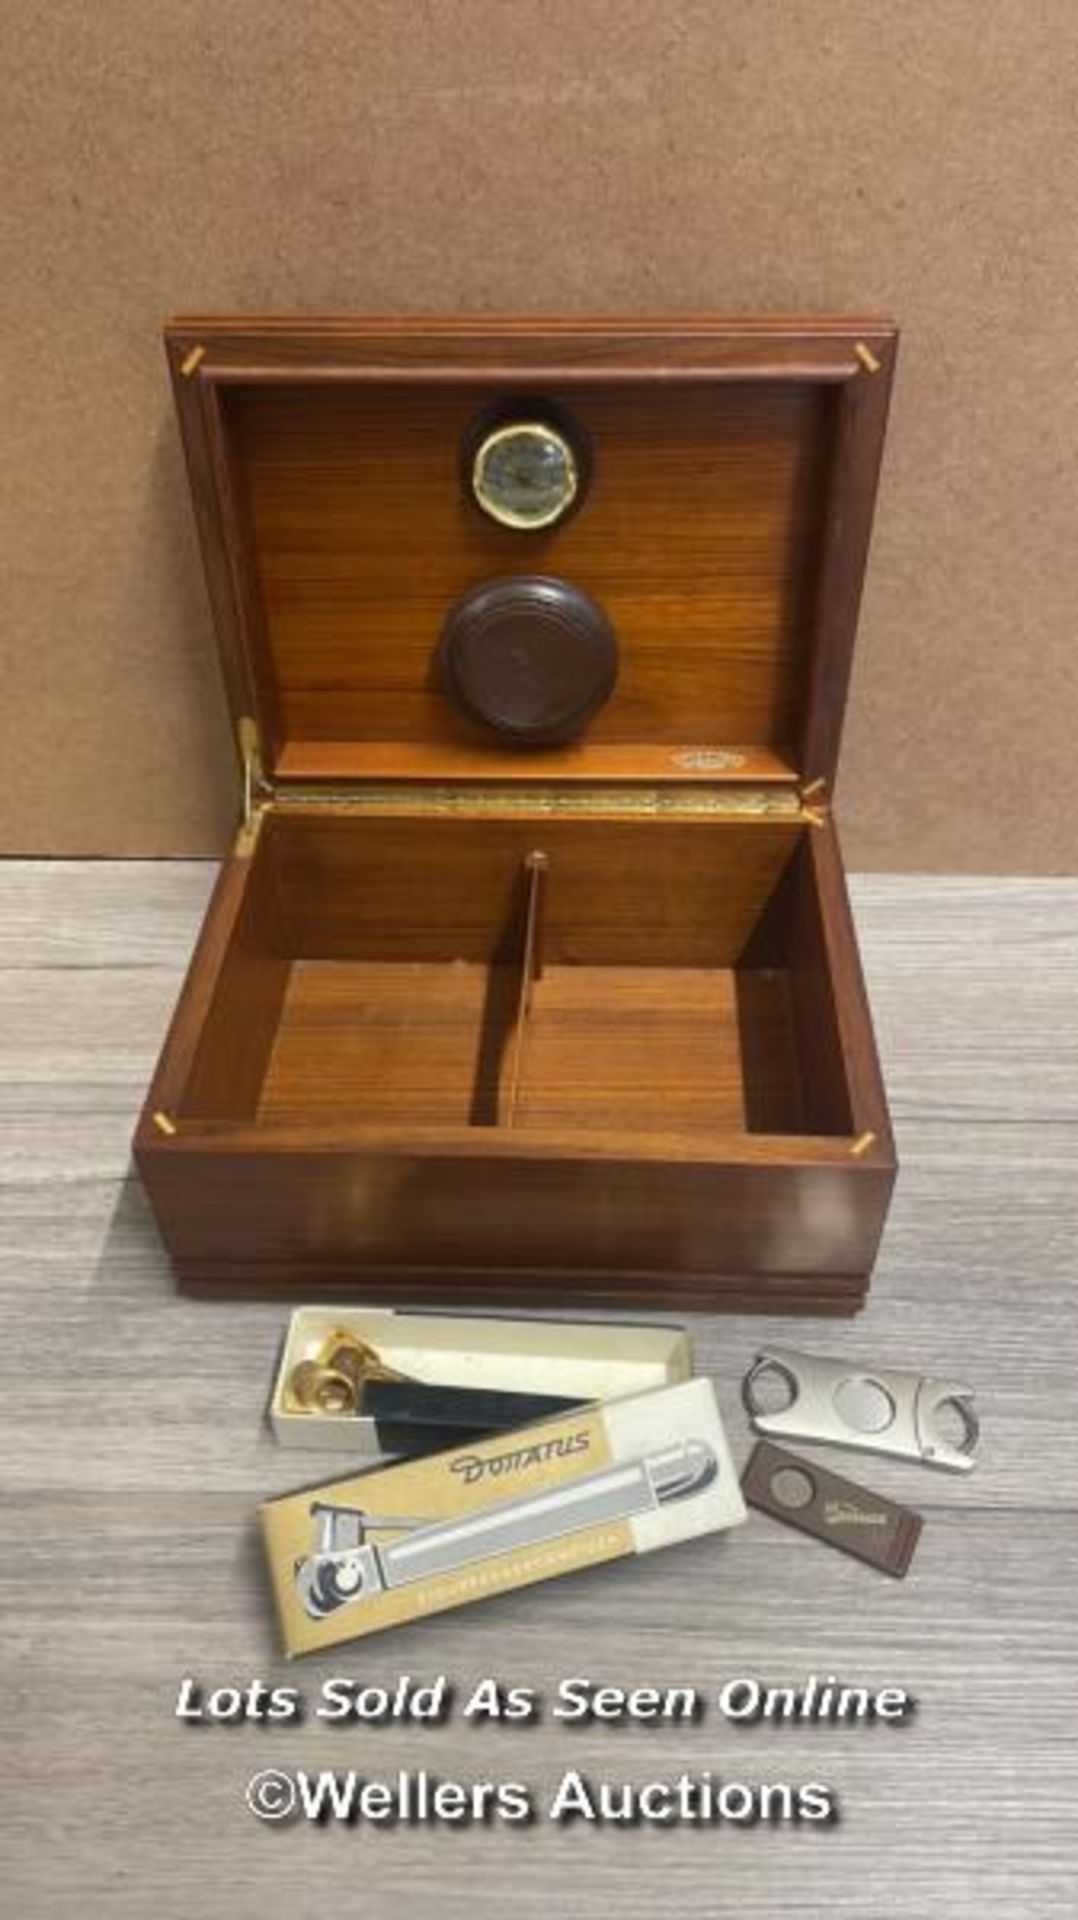 A SAVINELLI CIGAR HUMIDOR WITH BOXED DONATUS CIGAR CUTTER AND TWO MORE SMALL CIGAR CUTTERS